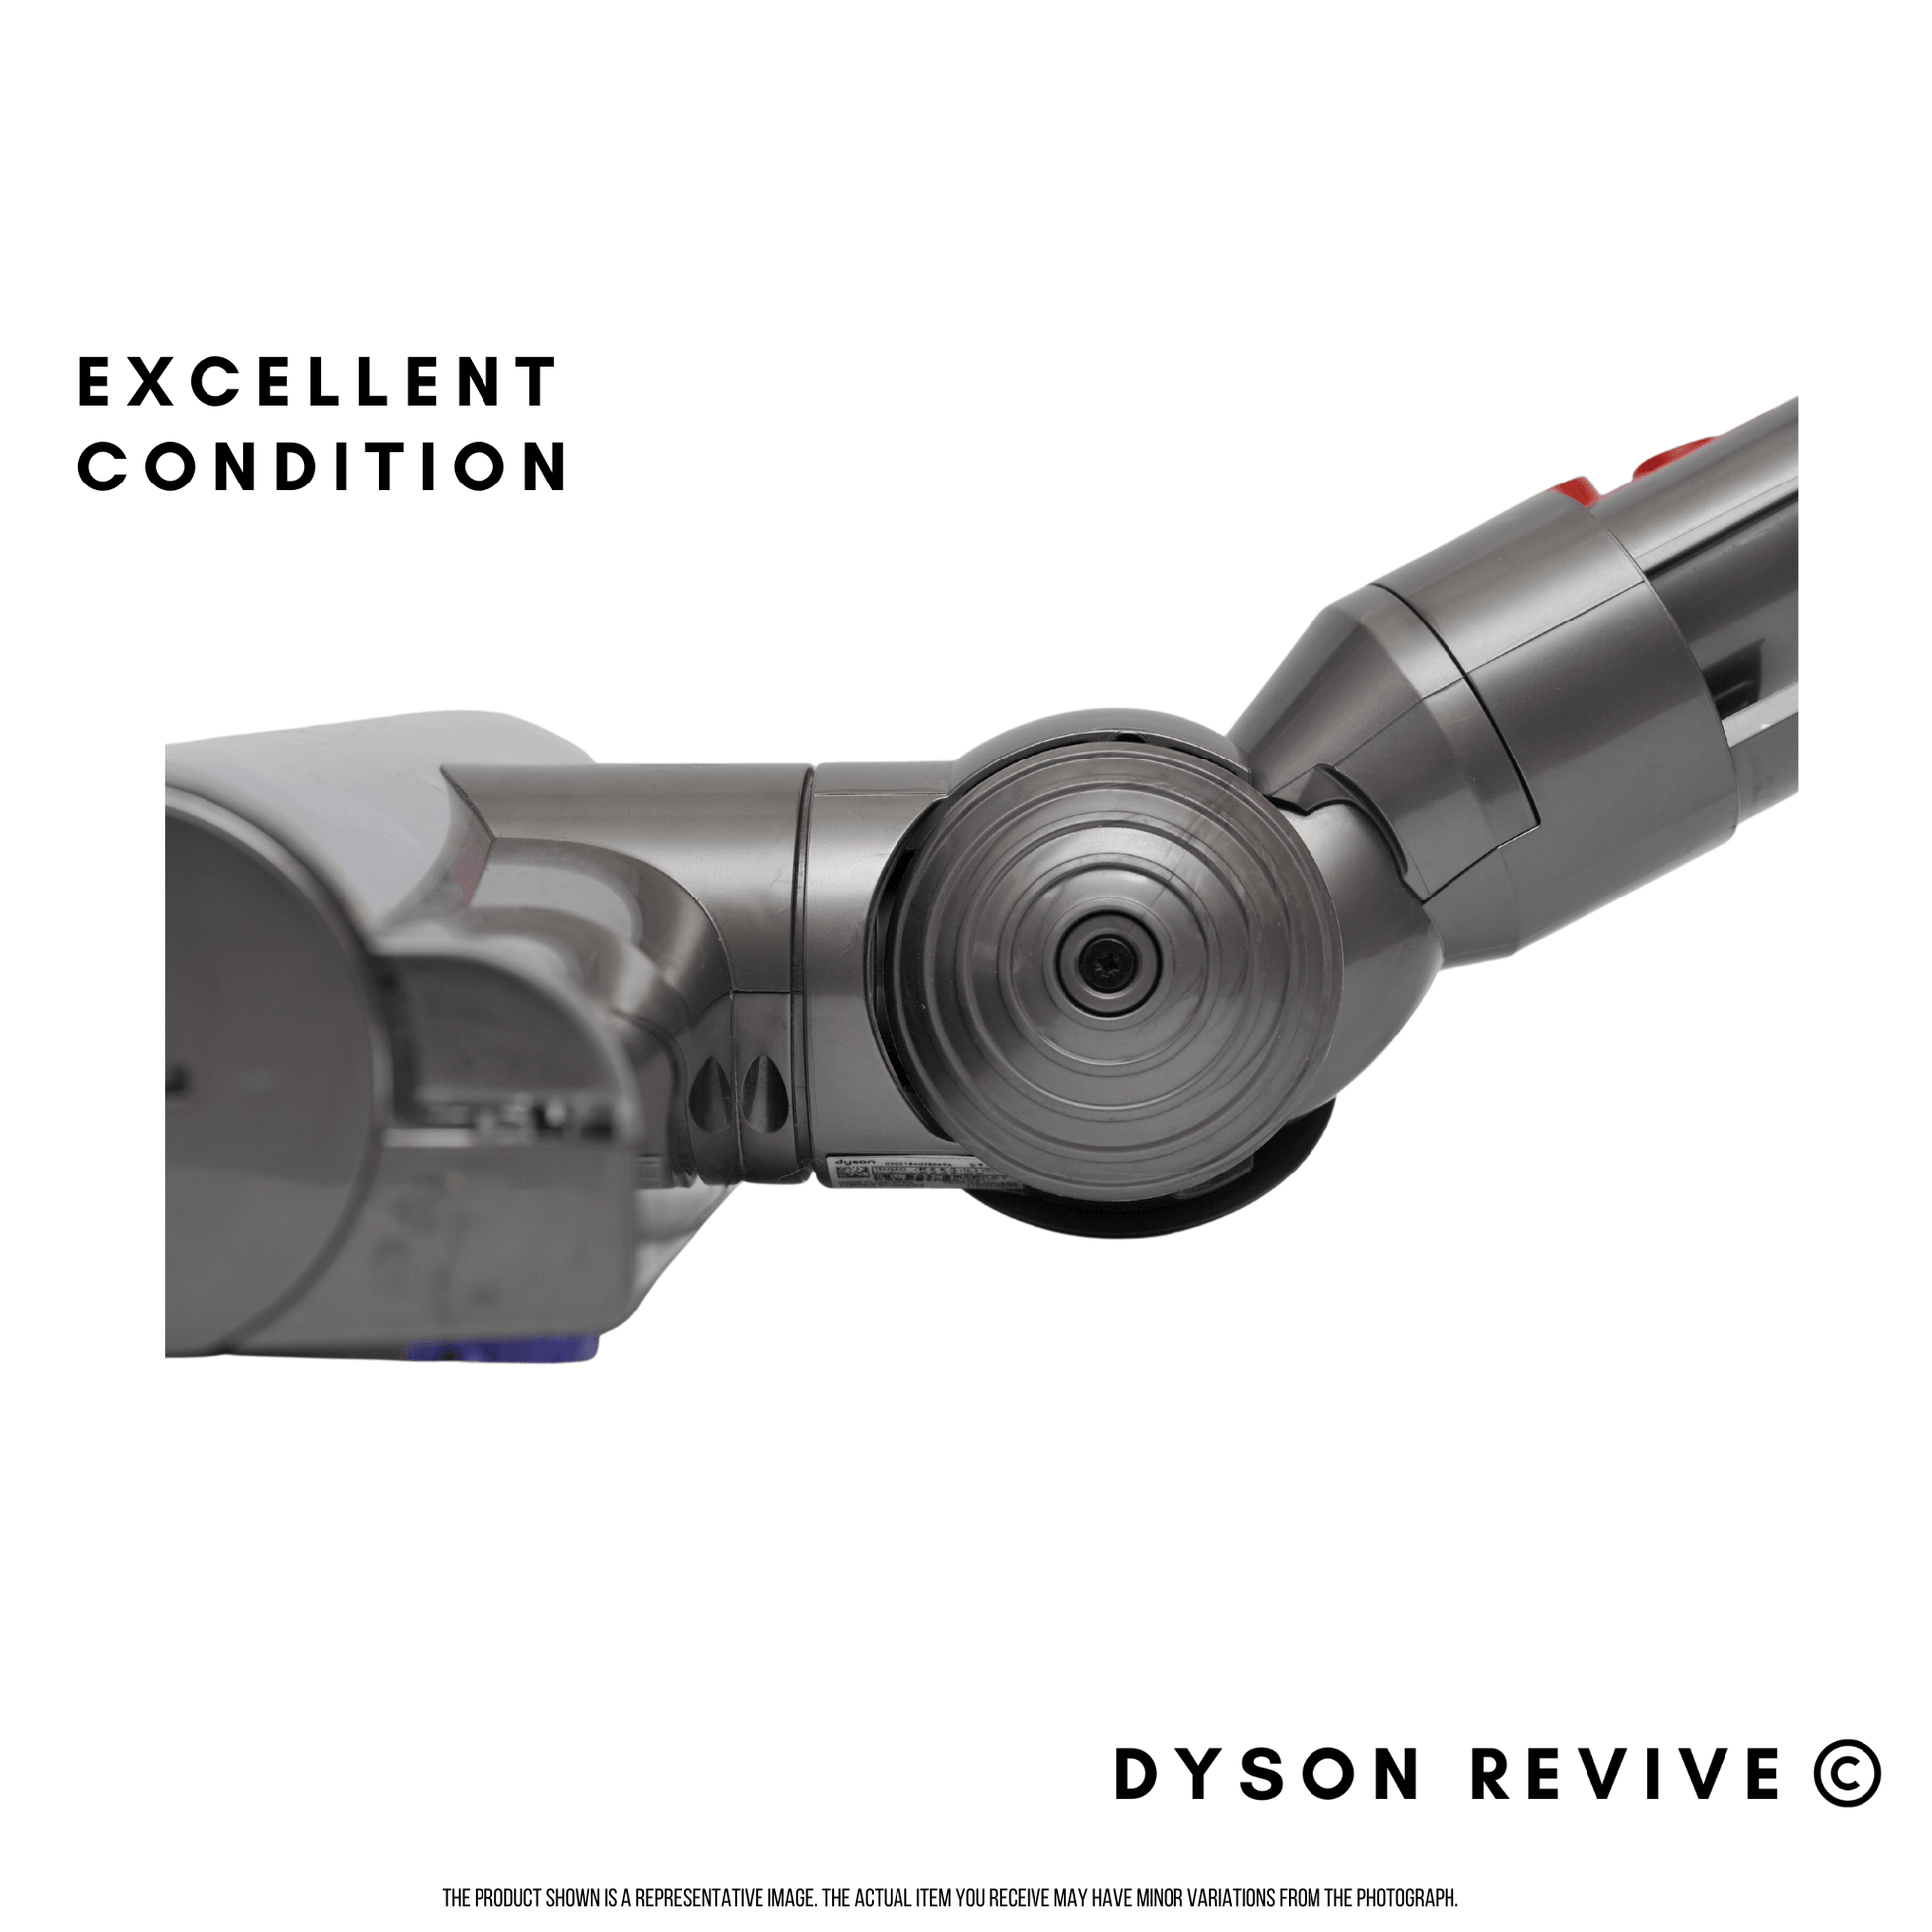 Genuine Dyson Refurbished V8 Direct Drive Vacuum Cleaner Head - Dyson Revive